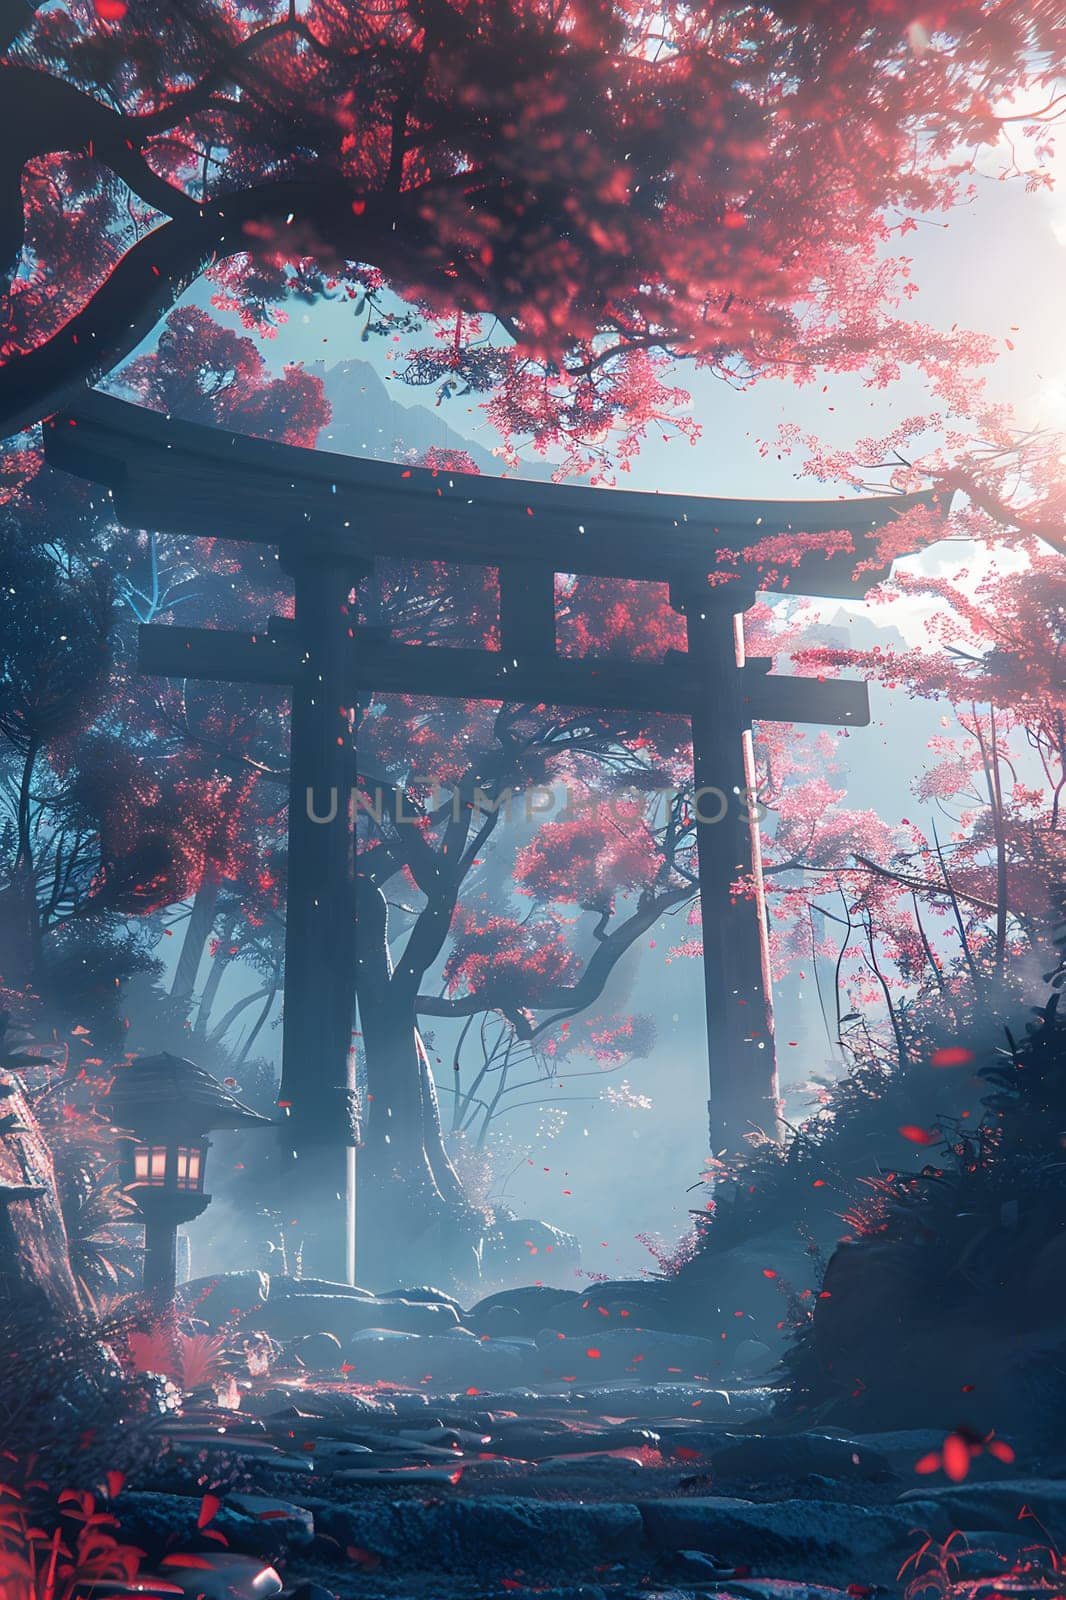 A torii gate stands tall in the middle of a forest, surrounded by trees with vibrant red leaves. The atmosphere is serene, with a magenta sky and fluffy clouds overhead